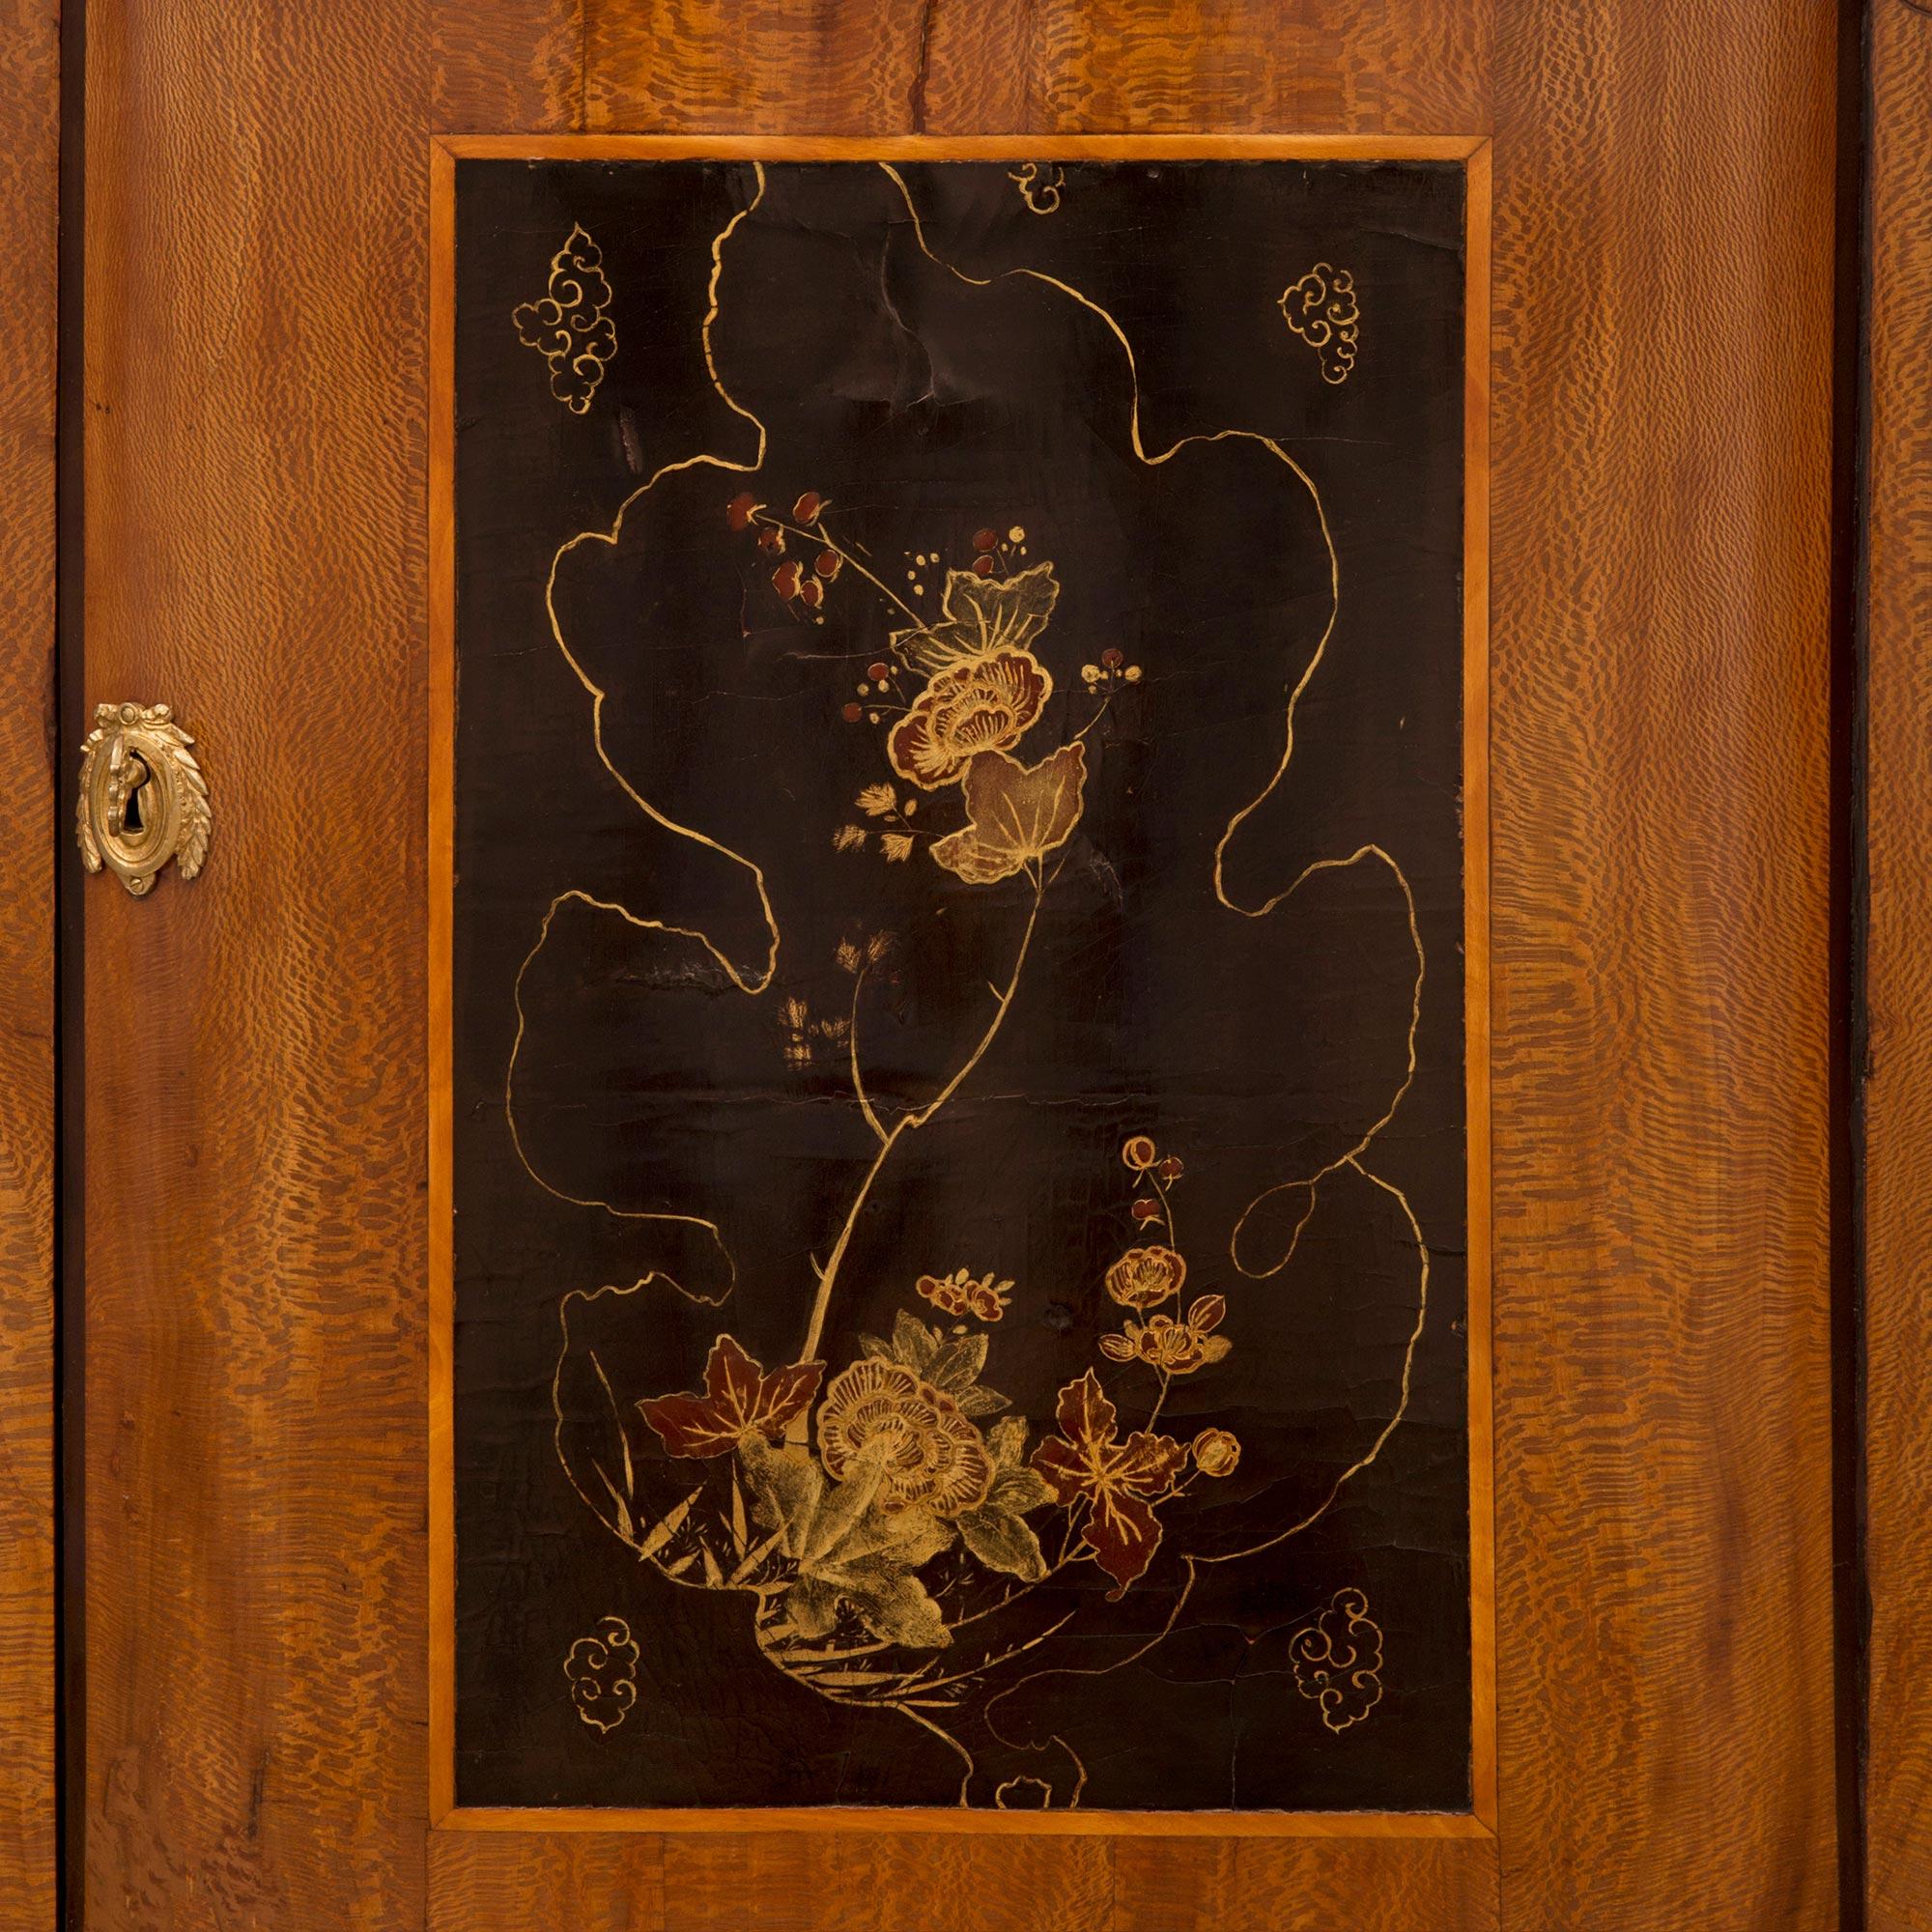 Italian 18th Century Japanese Lacquer and Lace Wood Veneer Cabinet For Sale 1